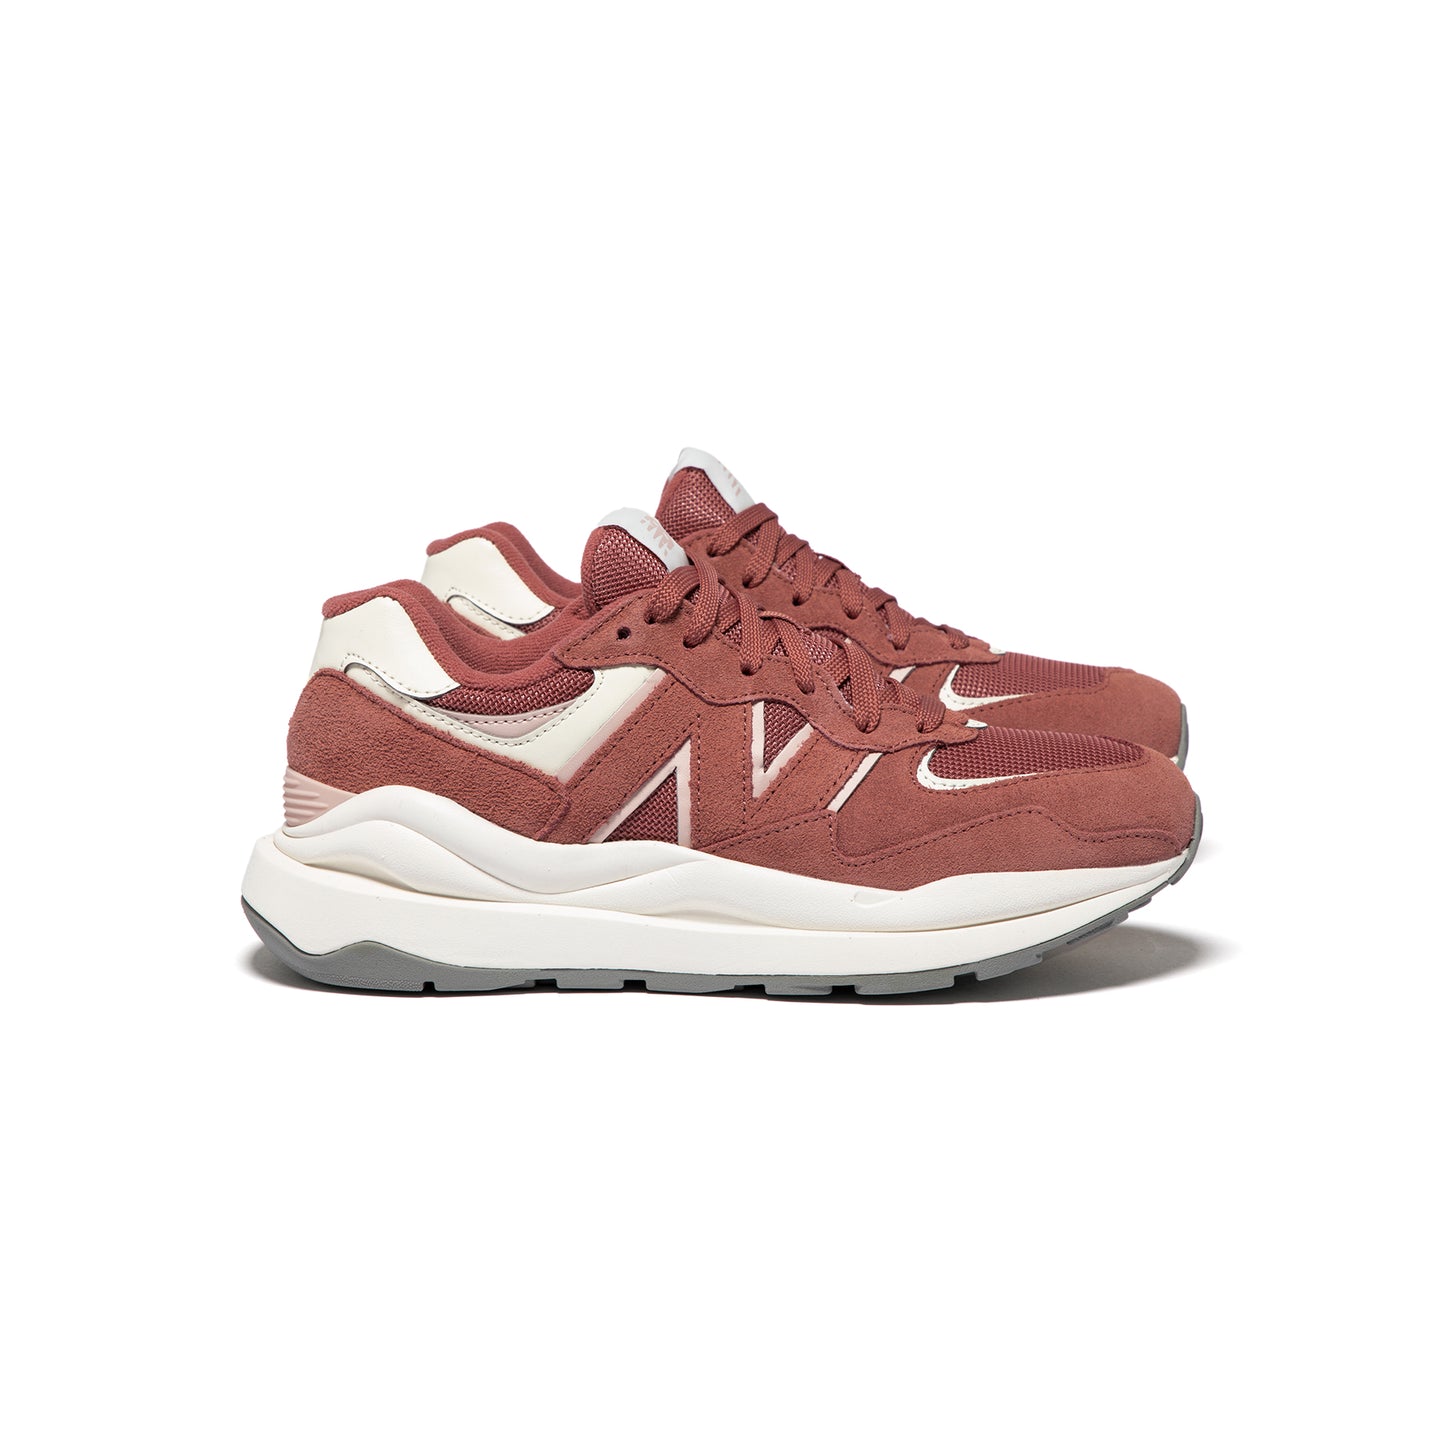 New Balance Womens 57/40 (Washed Henna/Oyster Pink)